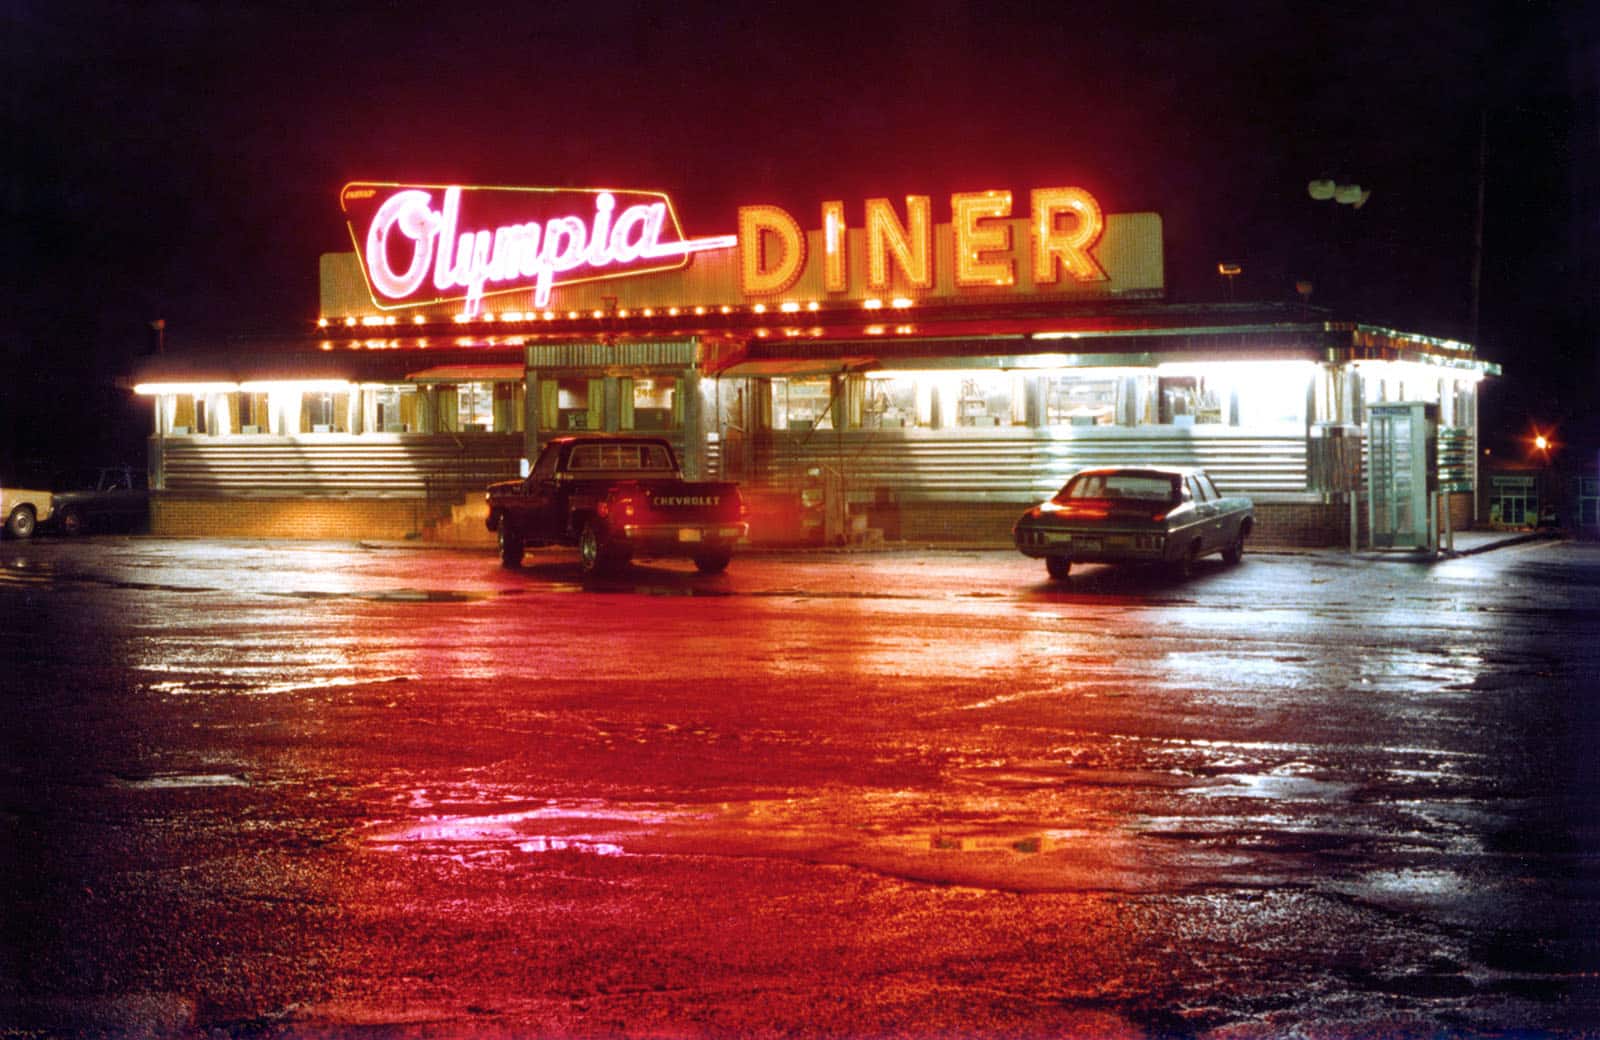 Title: Olympia Diner, November 27, 1981 Location: Newington, CT. Judge's comments: "When we think of New England, we often think of colorful fall days. New England can be industrial and urban, as well as rural and scenic. New England includes six states that have varied cultures and landscapes. That is why I am drawn to this night photograph bathed in red-light reflections. This often-photographed landmark diner in Connecticut originally opened in Massachusetts and was moved to its present location in 1954. It is made of stainless steel and is the longest of its kind in the United States. It is a cross-country highway pit stop as well as a popular dining post for locals and those “in the know.”" 